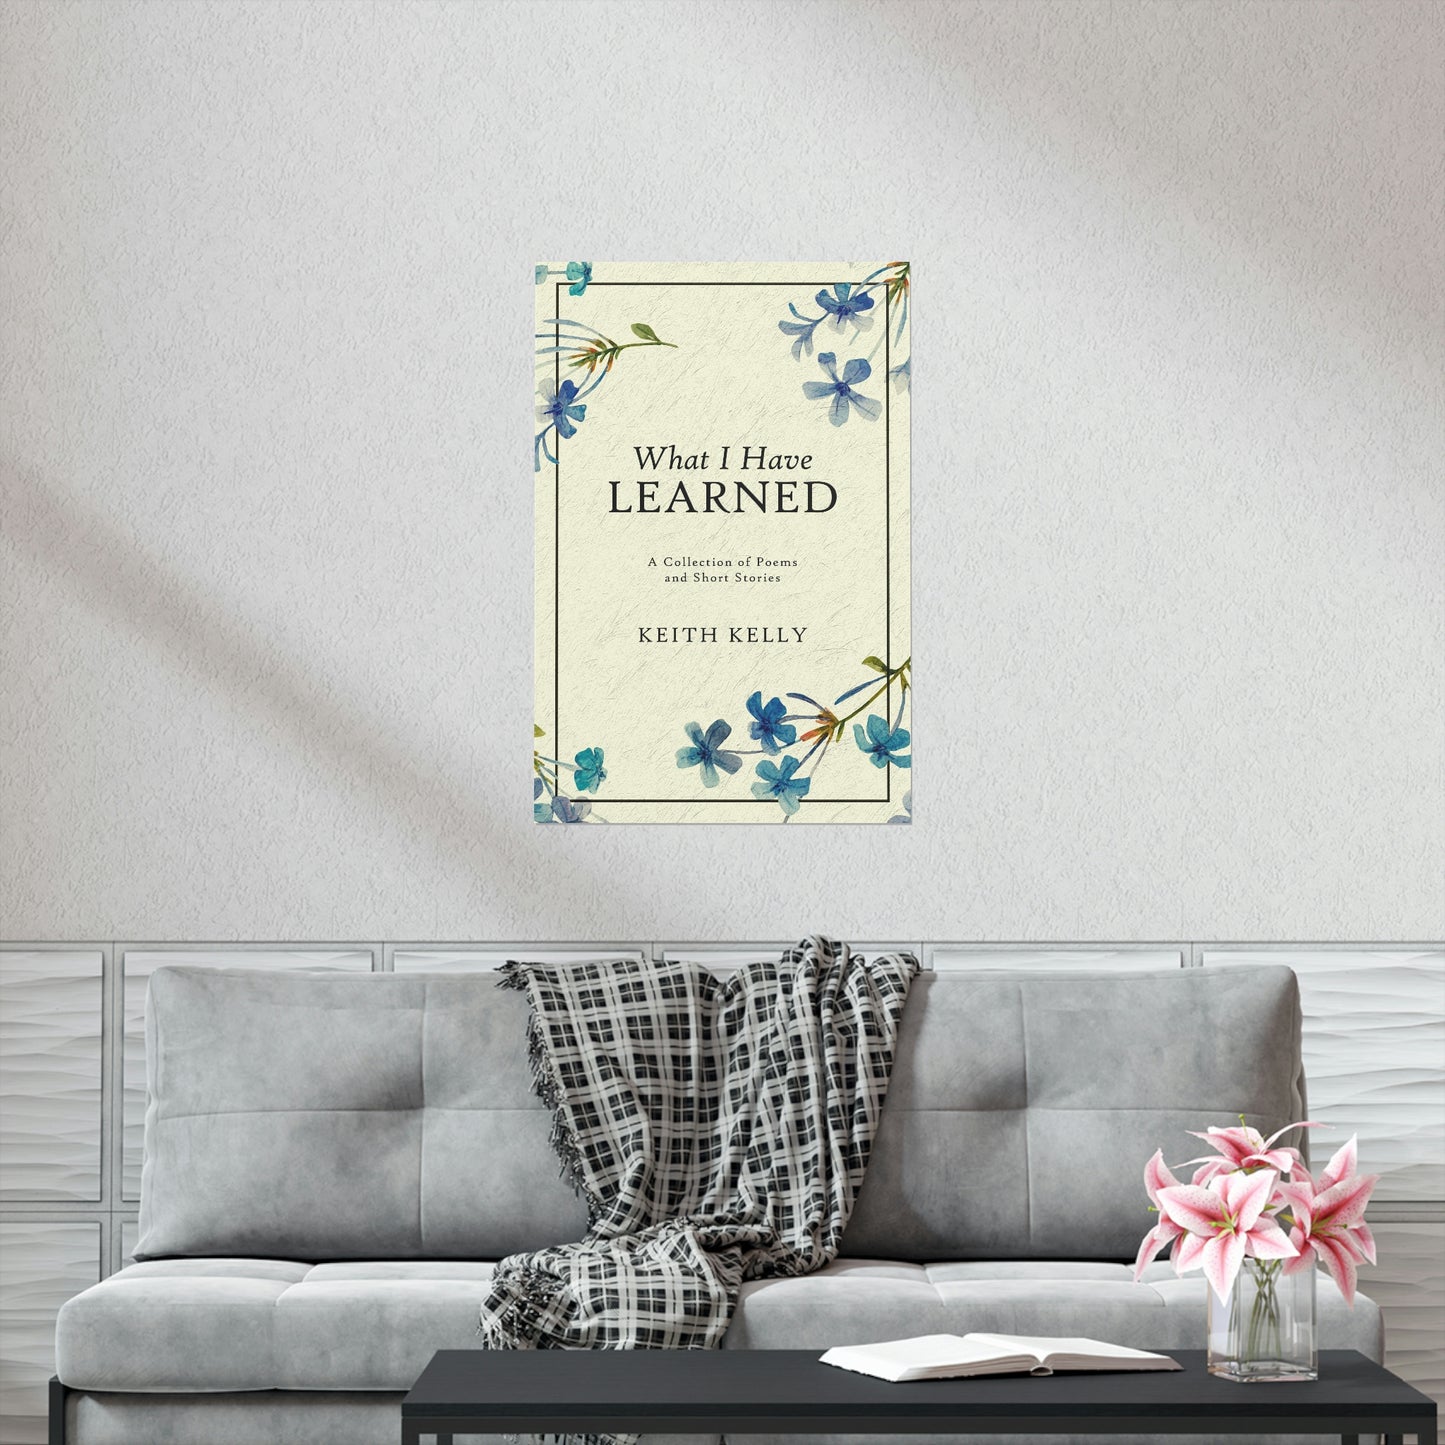 What I Have Learned - Matte Poster